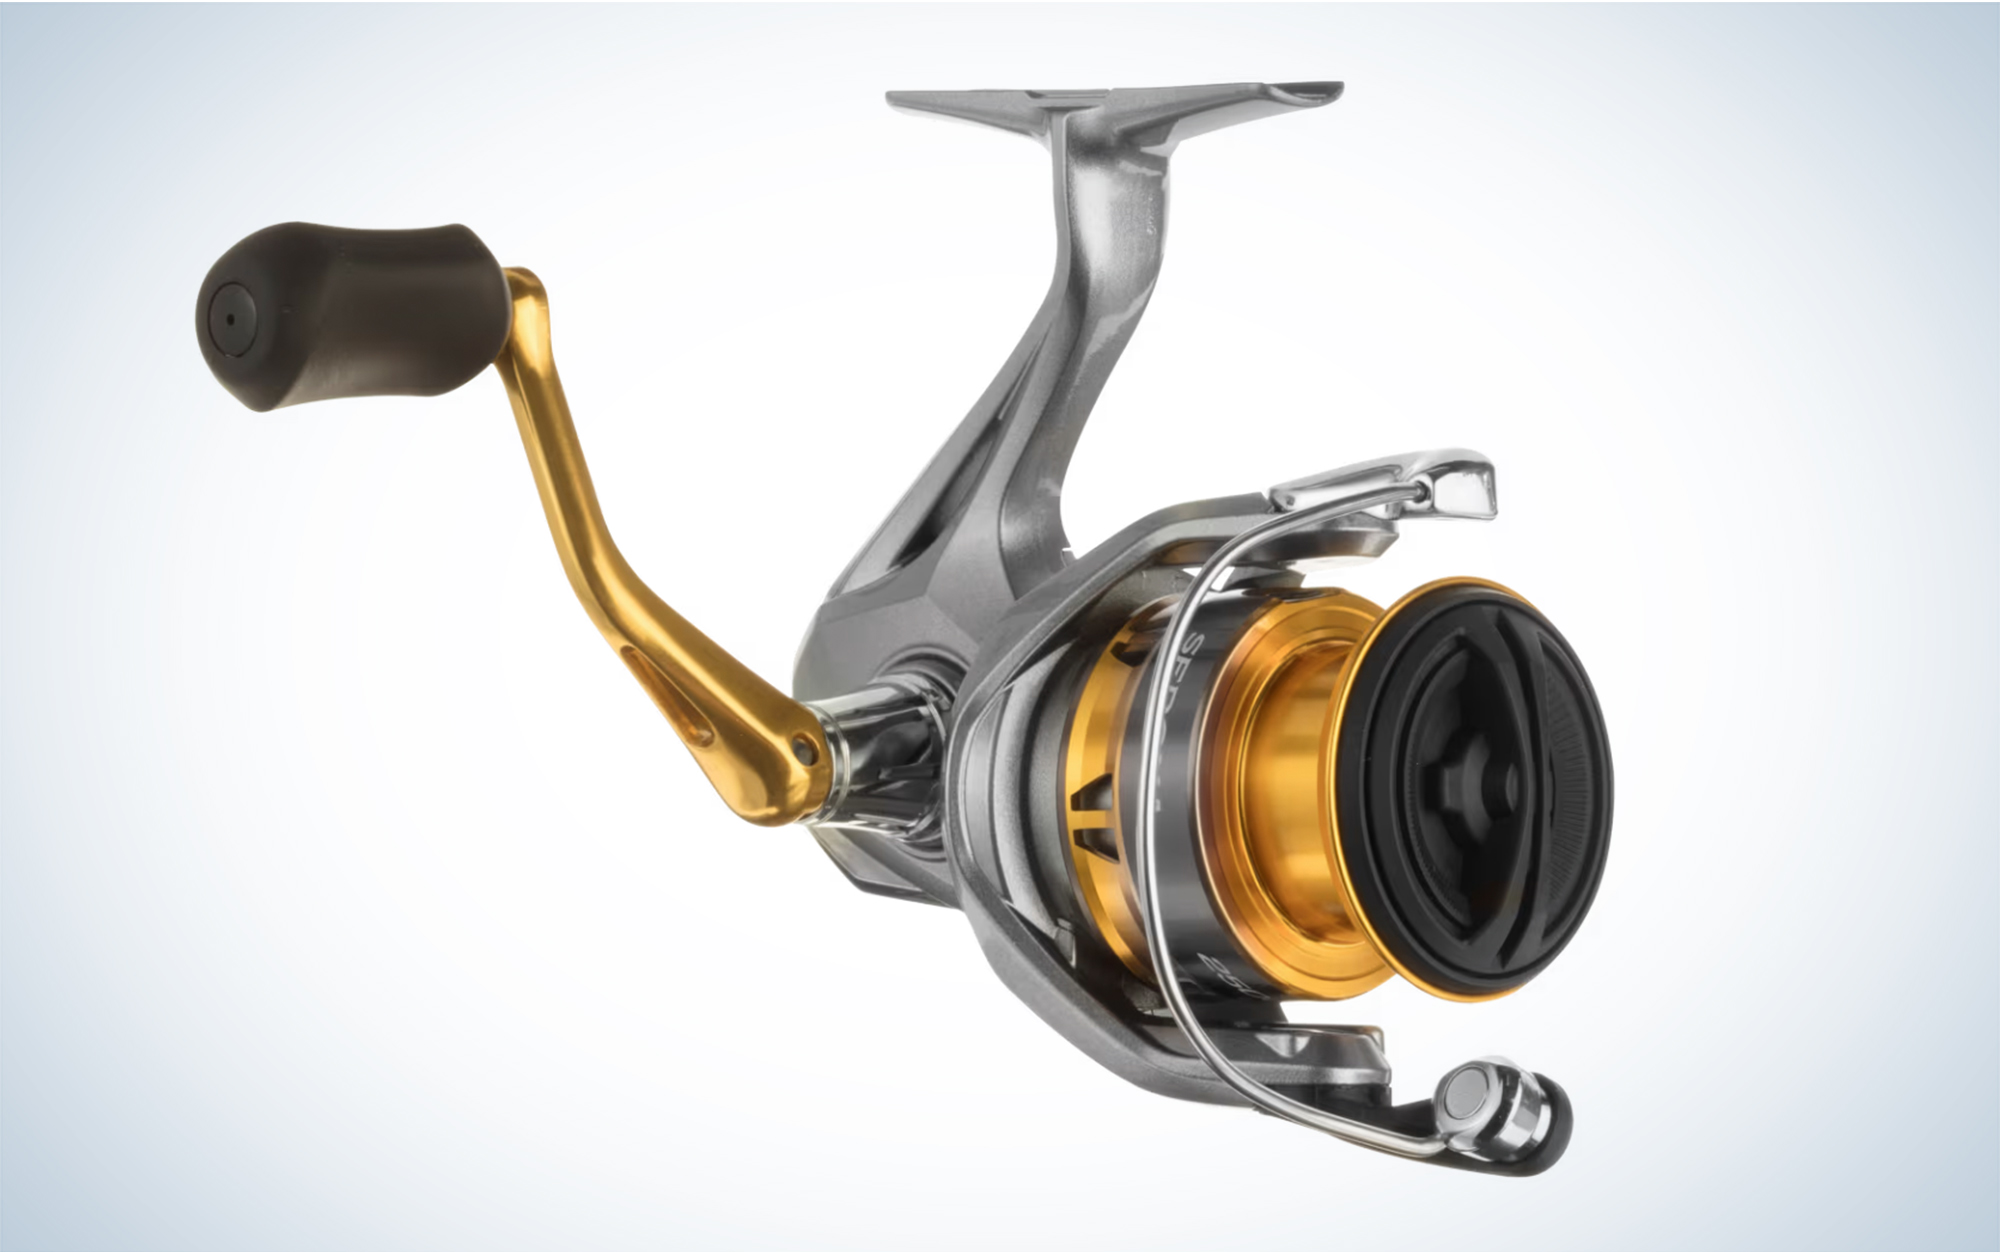 Last Minute Prime Day Fishing Gear Deals